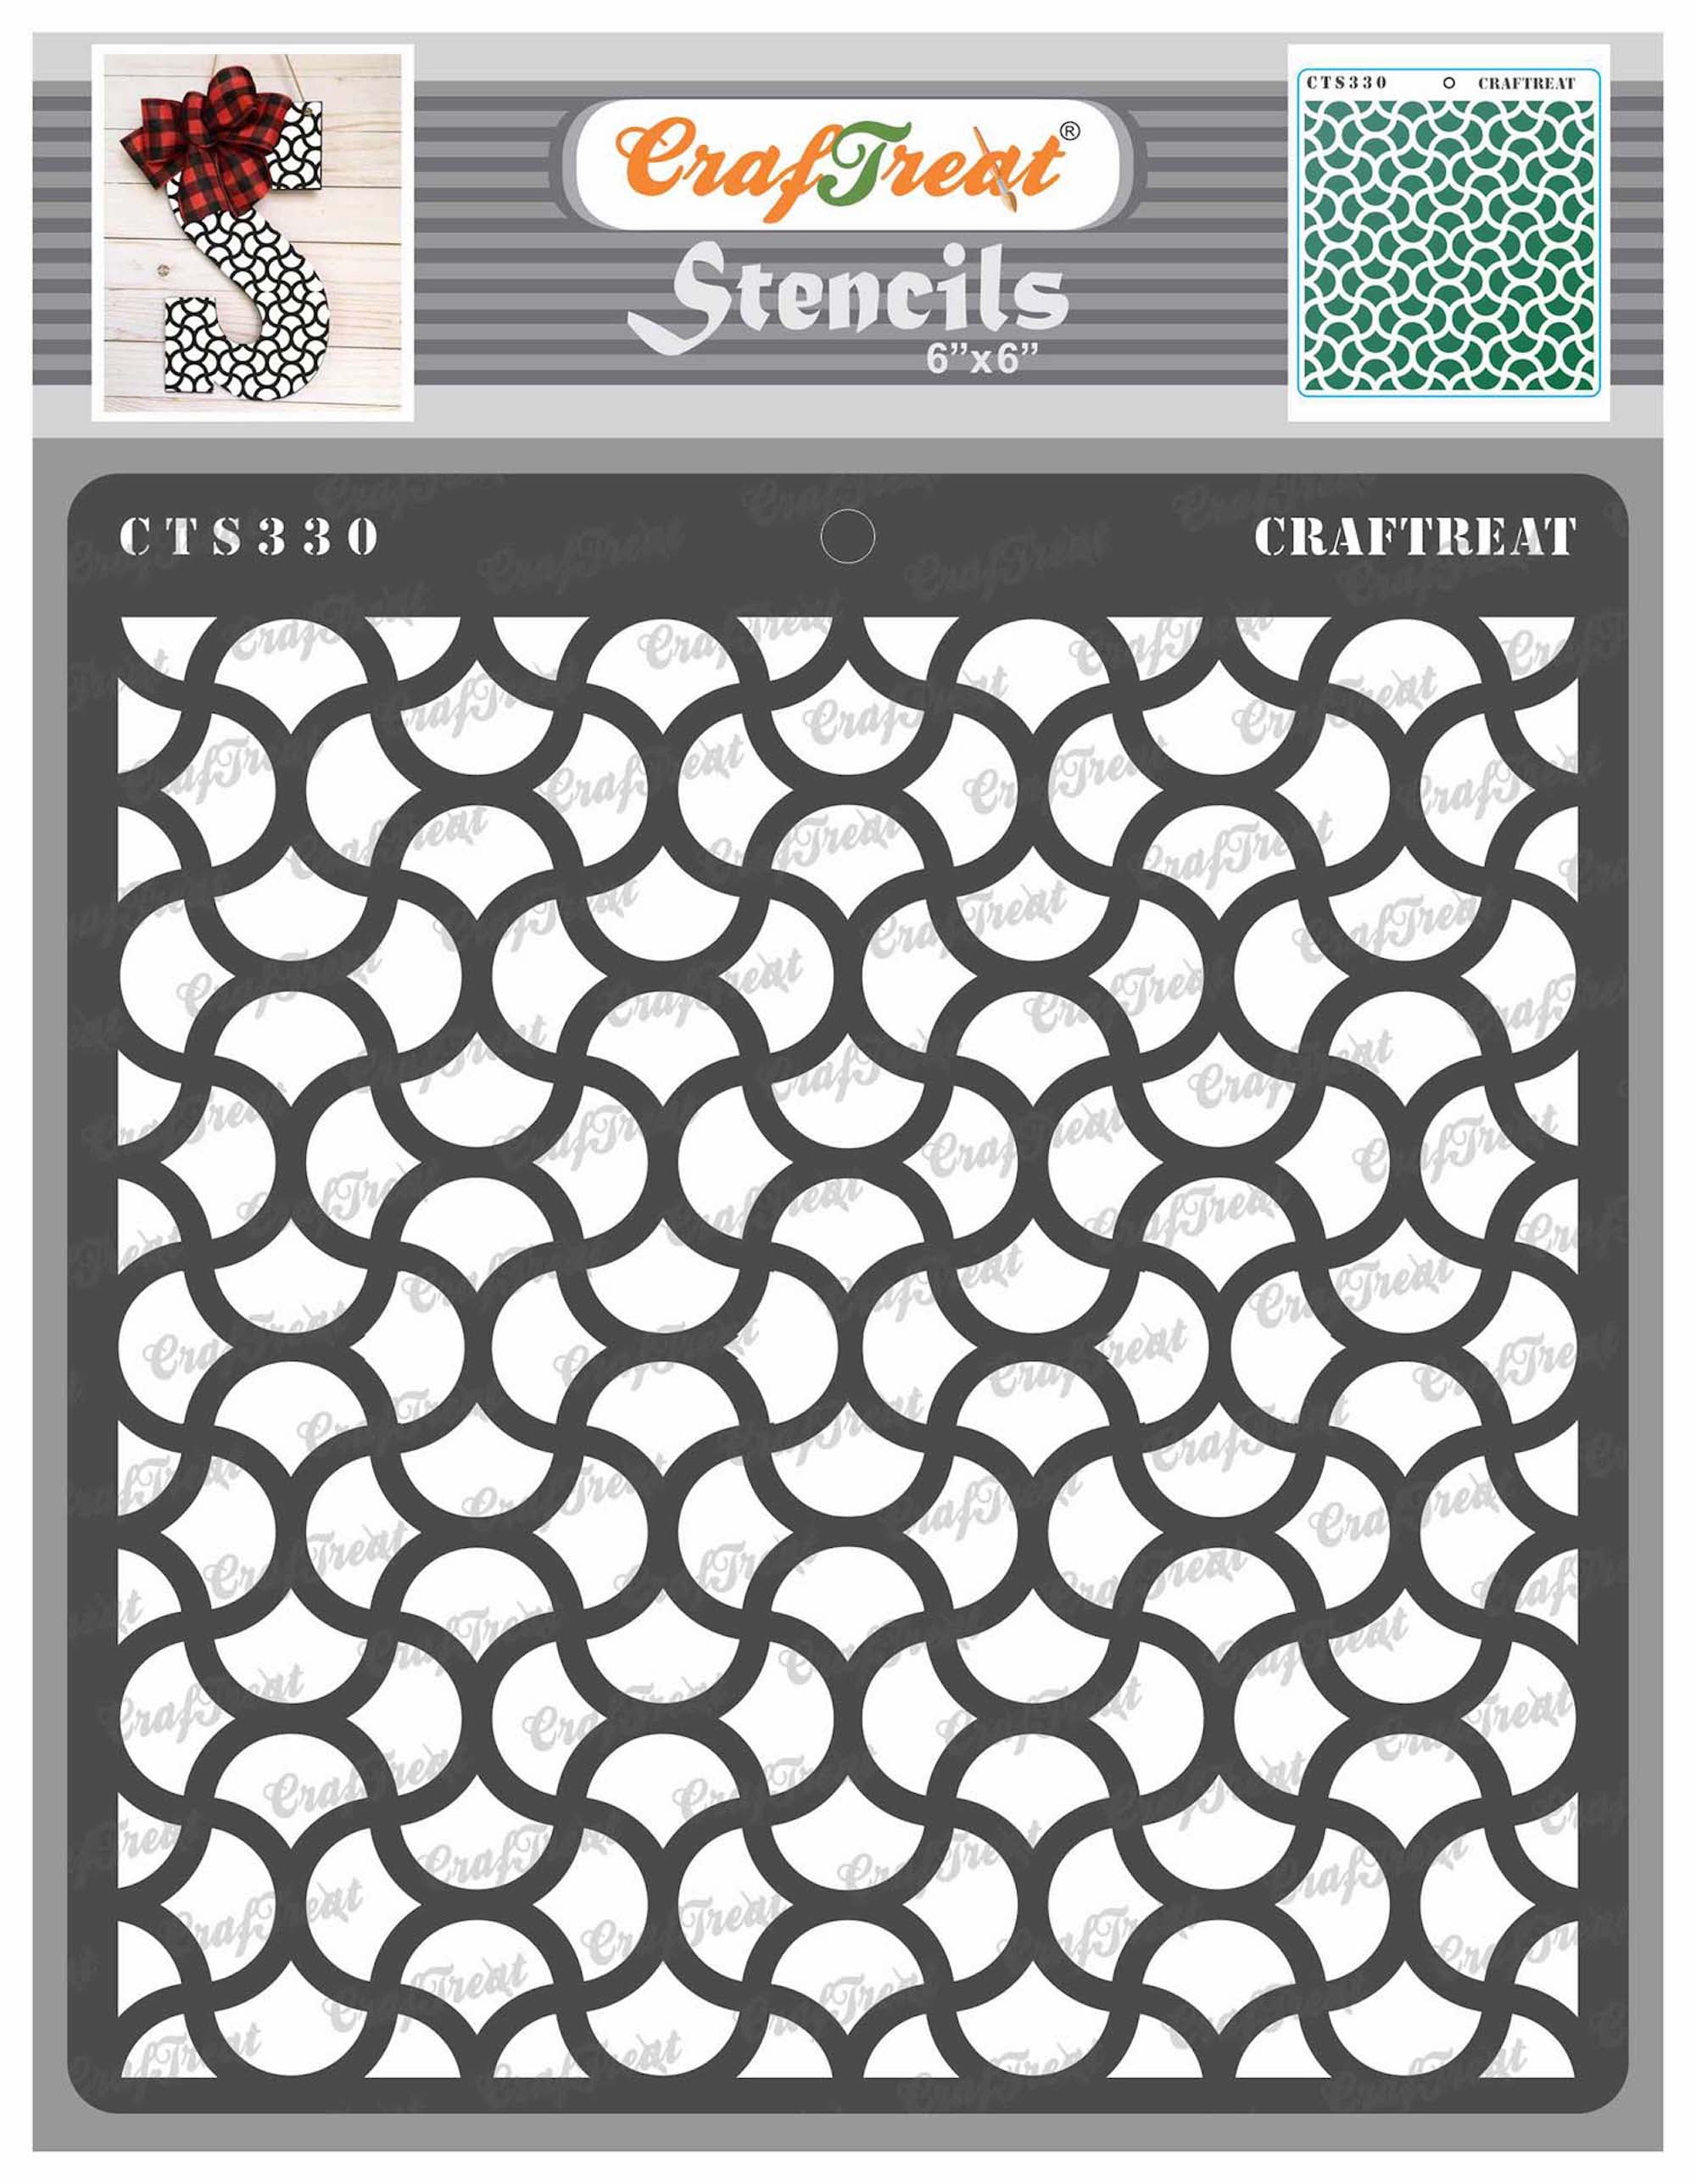 CrafTreat Scandinavian 3D Square Pattern Stencil for Paintings 6x6 Inches  Online — Craftreat